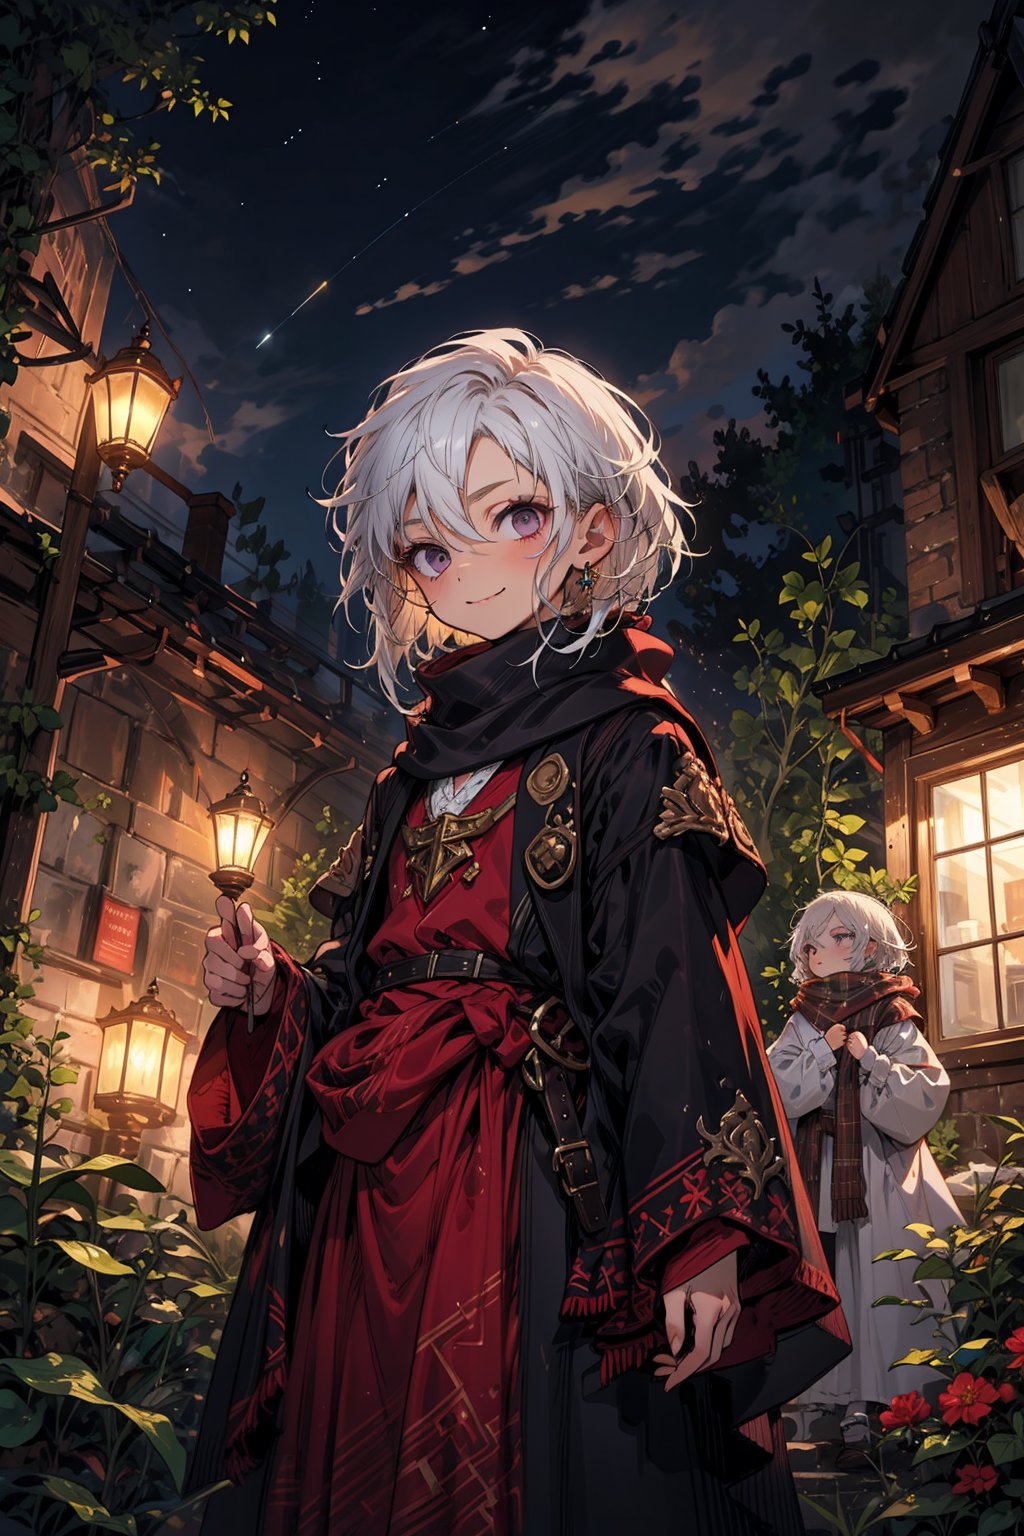 young_person, small_person, androgynous_look, flat_chest, white_hair, shoulder_length_hair, dark_eyes, uncertain_smile, very_slim, very_thin, close_up, fantasy_clothes, victorian_clothes, garden, night, dark_sky, small_body, white_robe, hermaphroditic_look, hermaphrodite, white_clothes, gold_marks, scarf, longer_hair